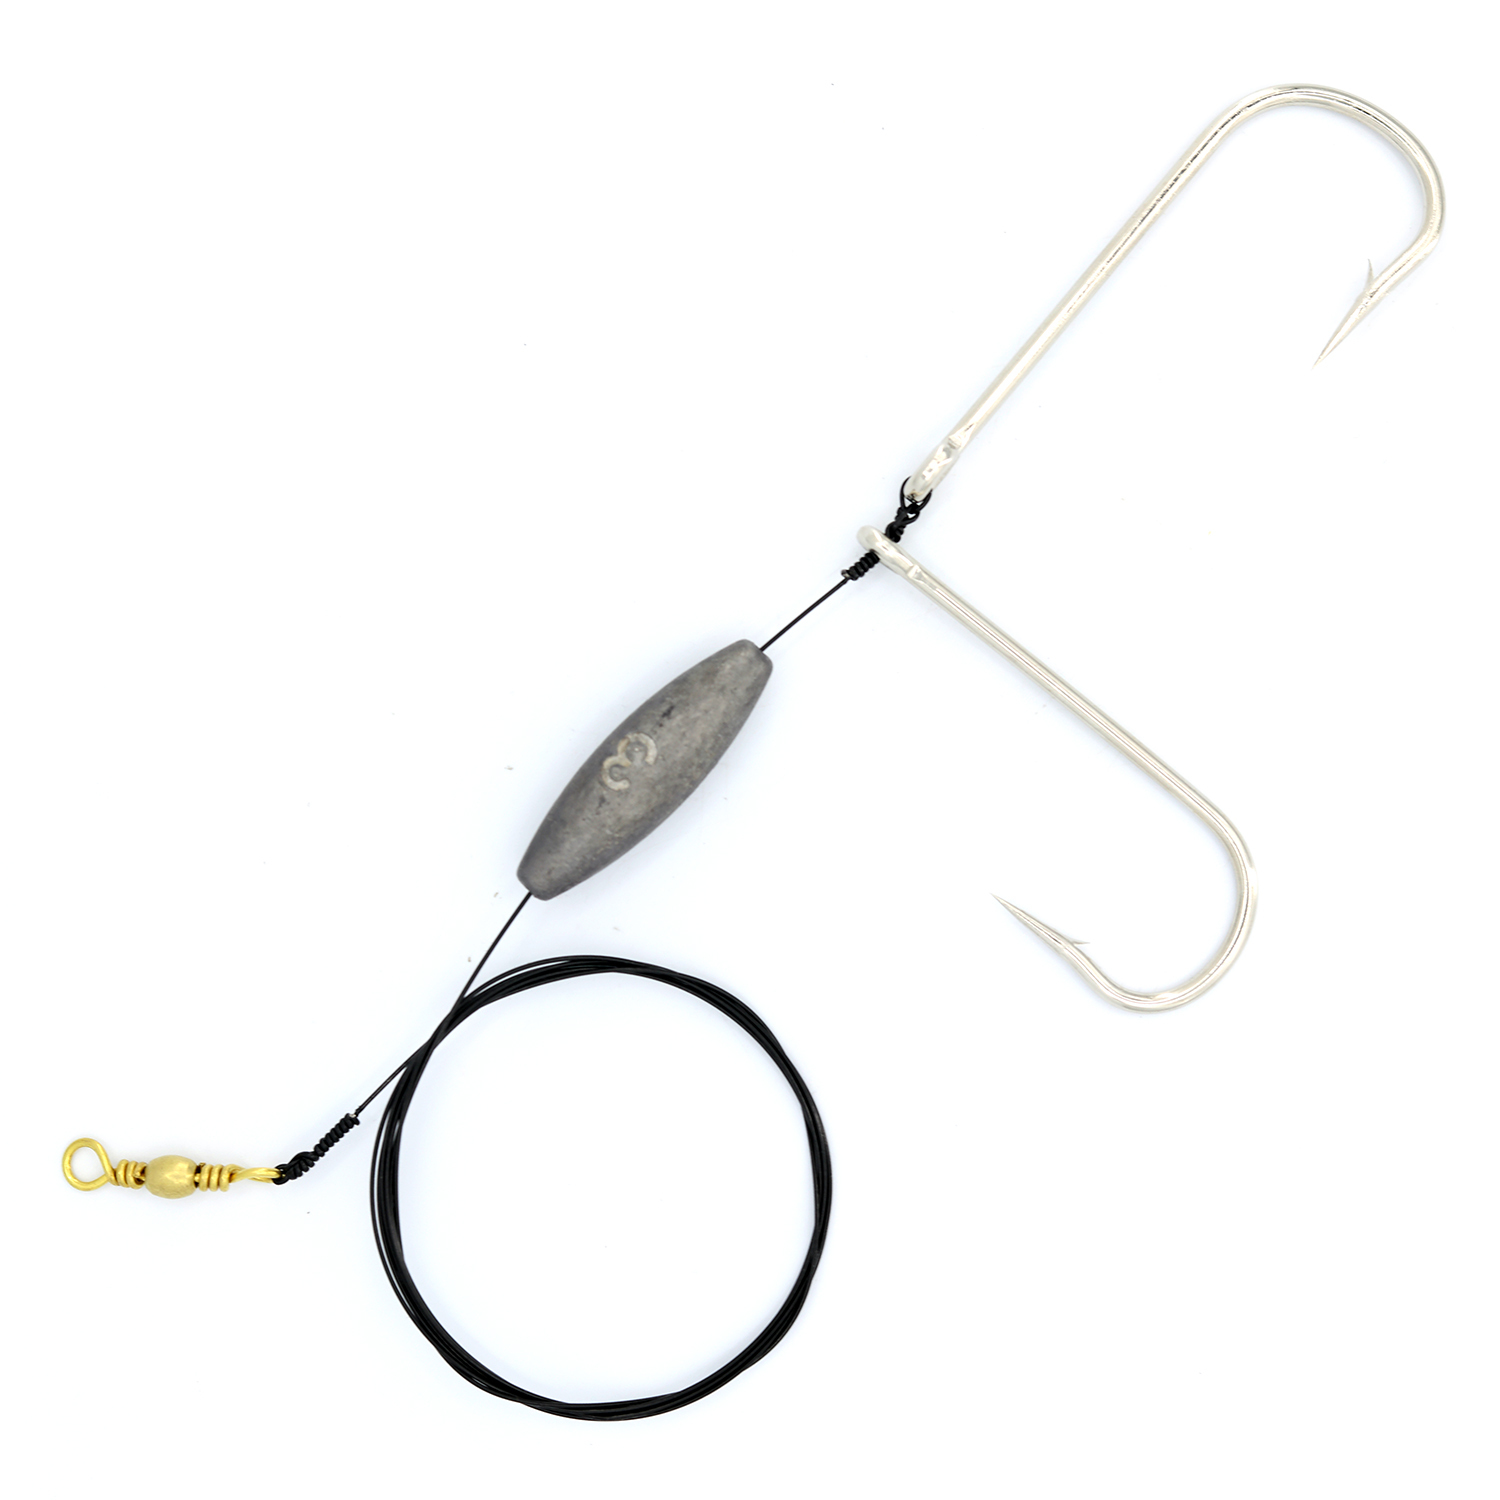 qareb american wire rig with double hooks sizes 0/1 and 1, sinker size 3 and wire test 90lb